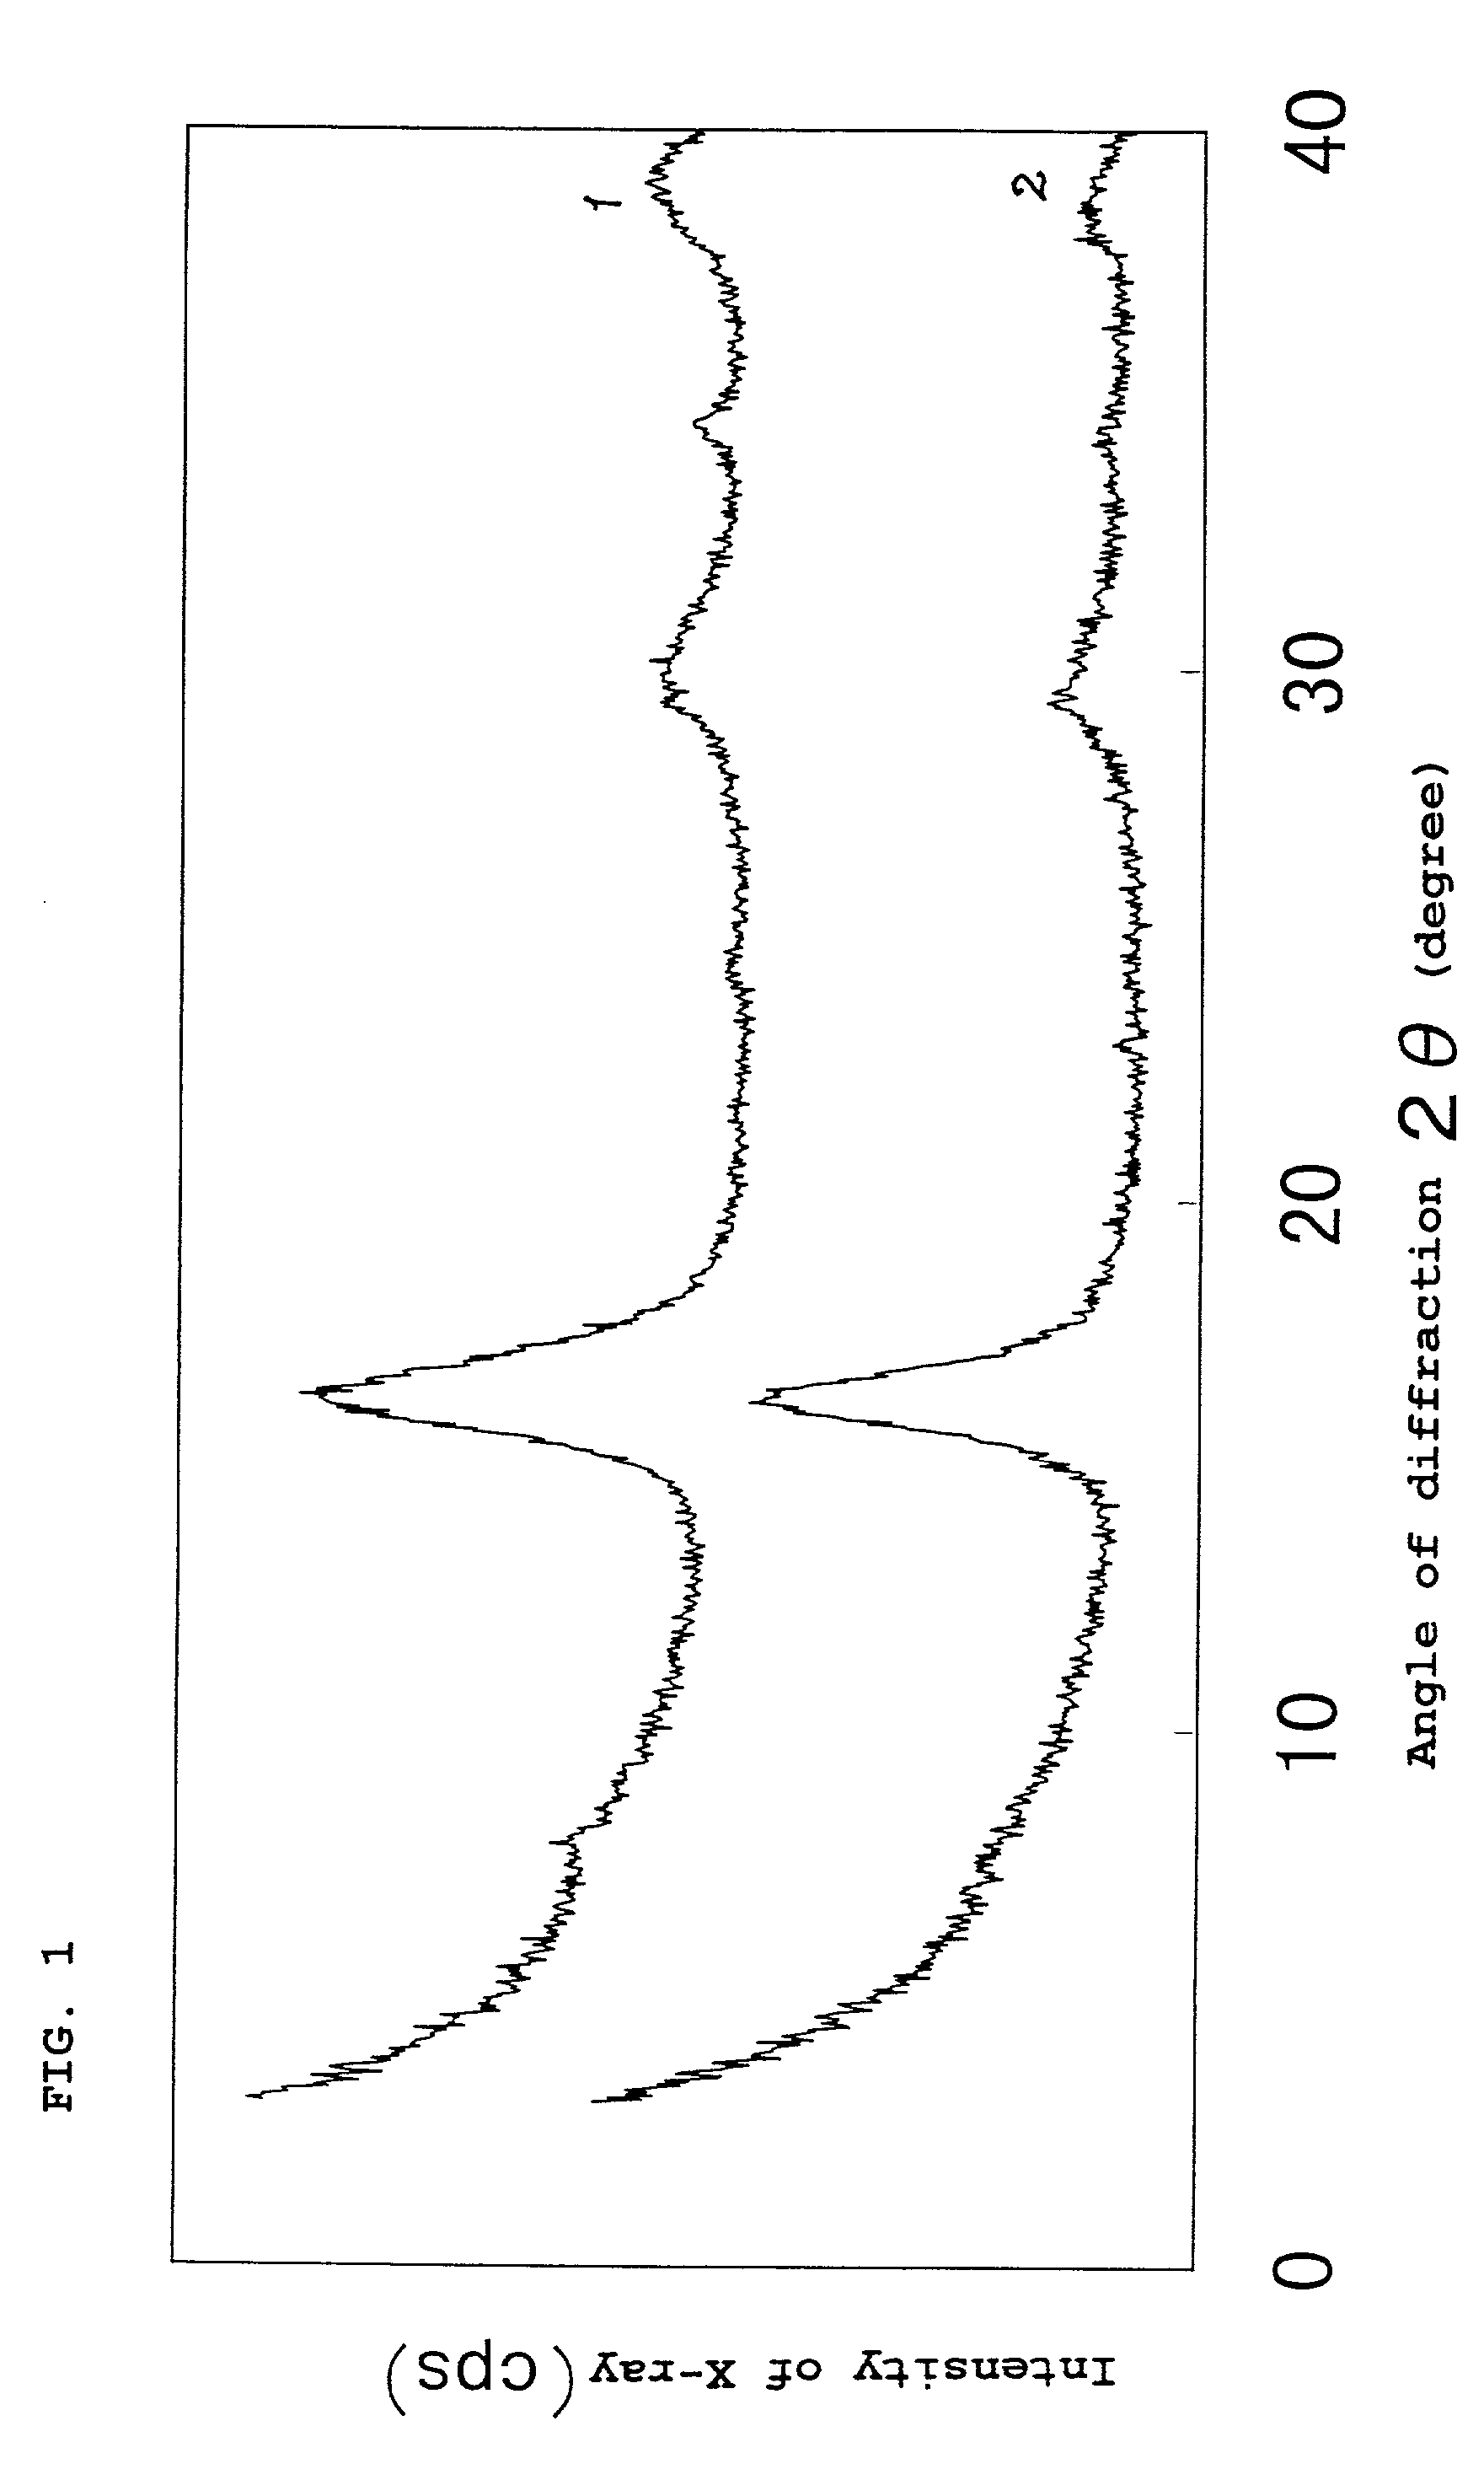 Iron sulfides, processes for producing the same, iron sulfide mixture, heavy metal treating agent, and method of treating with the agent